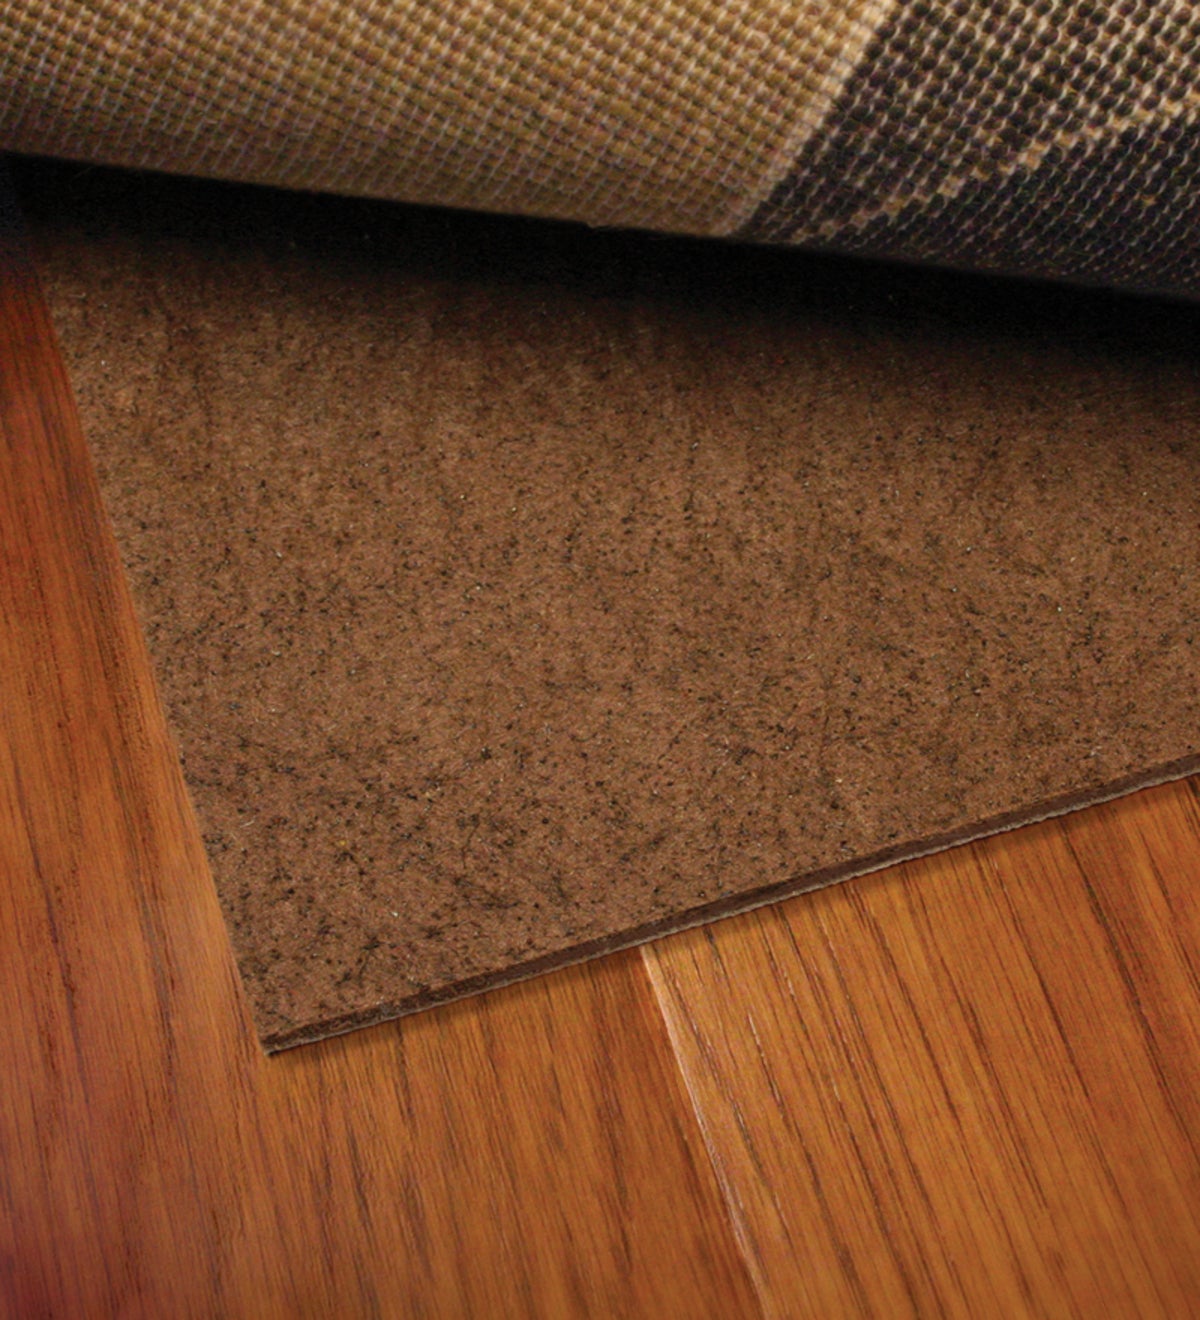 Luxehold Rug Pad Plus Plowhearth, What Kind Of Rug Pad To Use On Laminate Floors